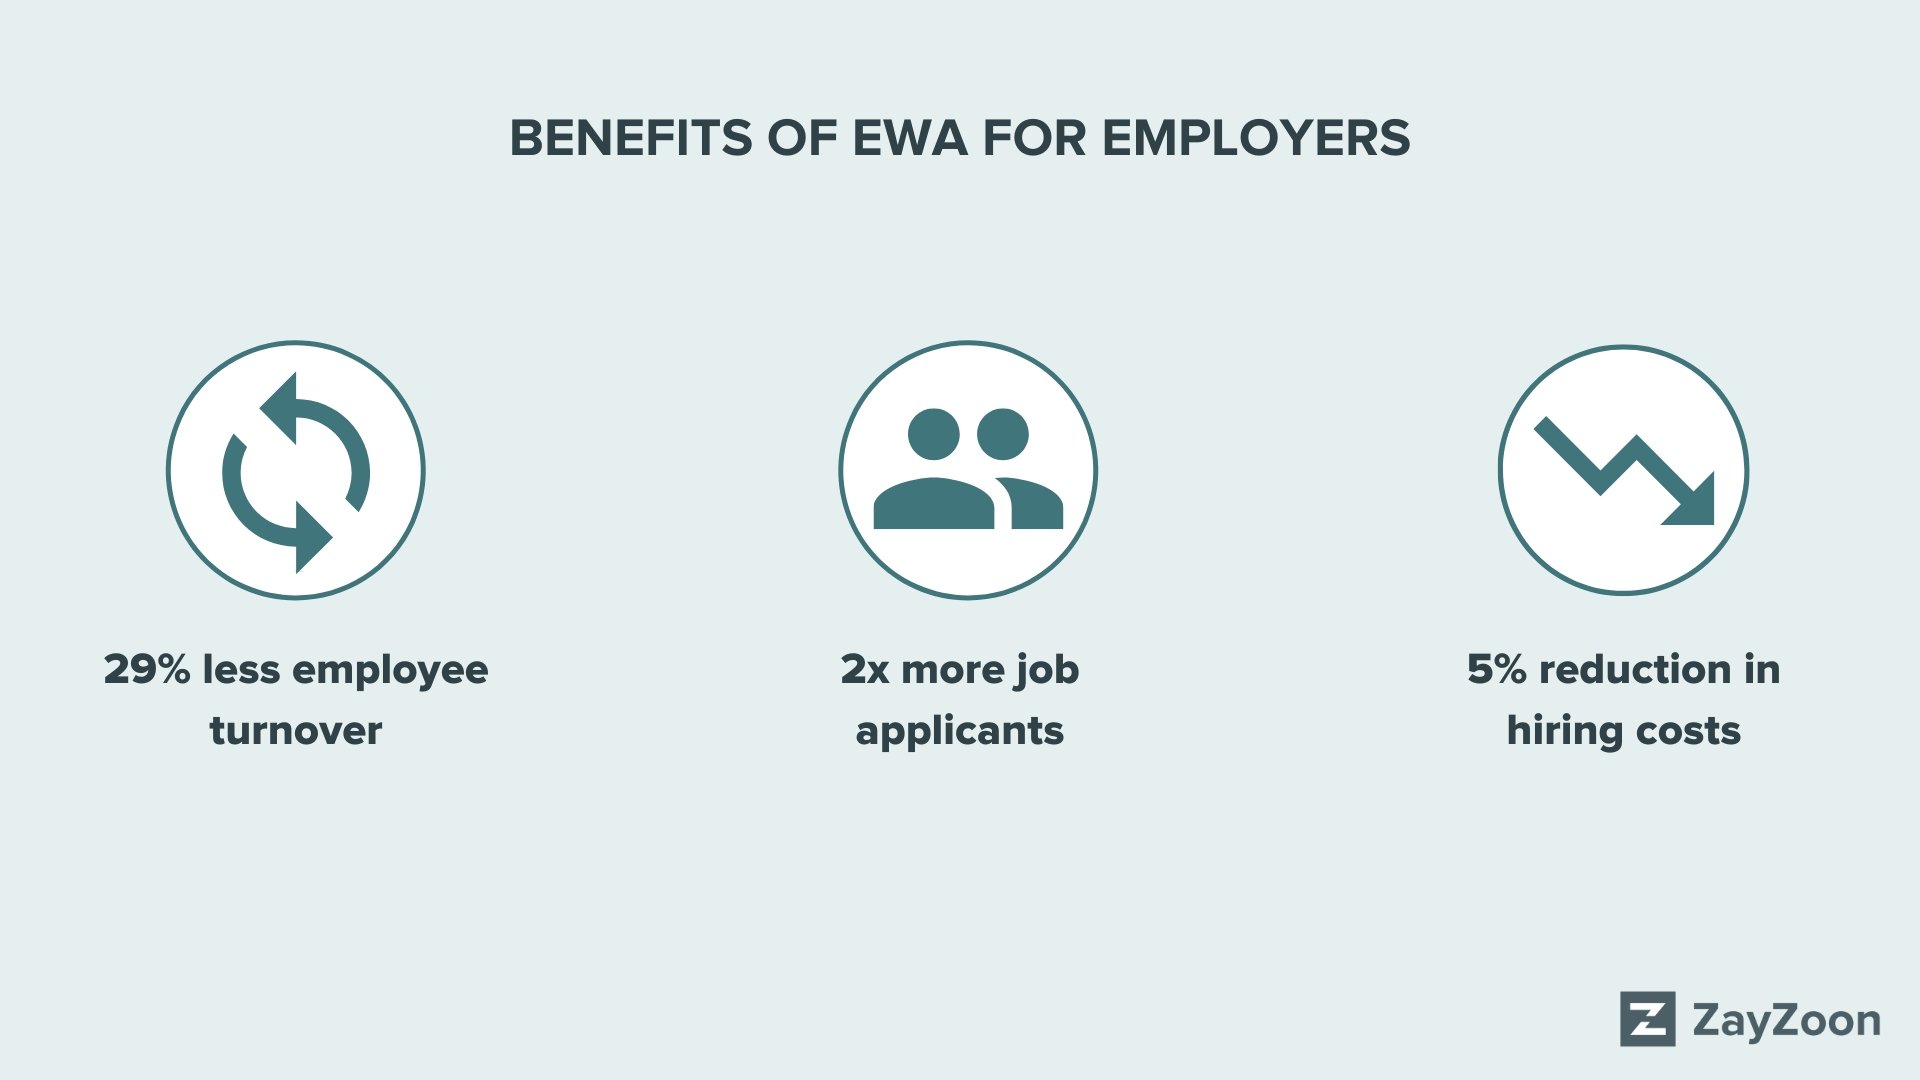 Infographic showing three key benefits employers can receive from EWA. The first, 29% less employee turnover. The second, 2x more job applicants. Finally, with EWA employers can reduce hiring costs by 5%.